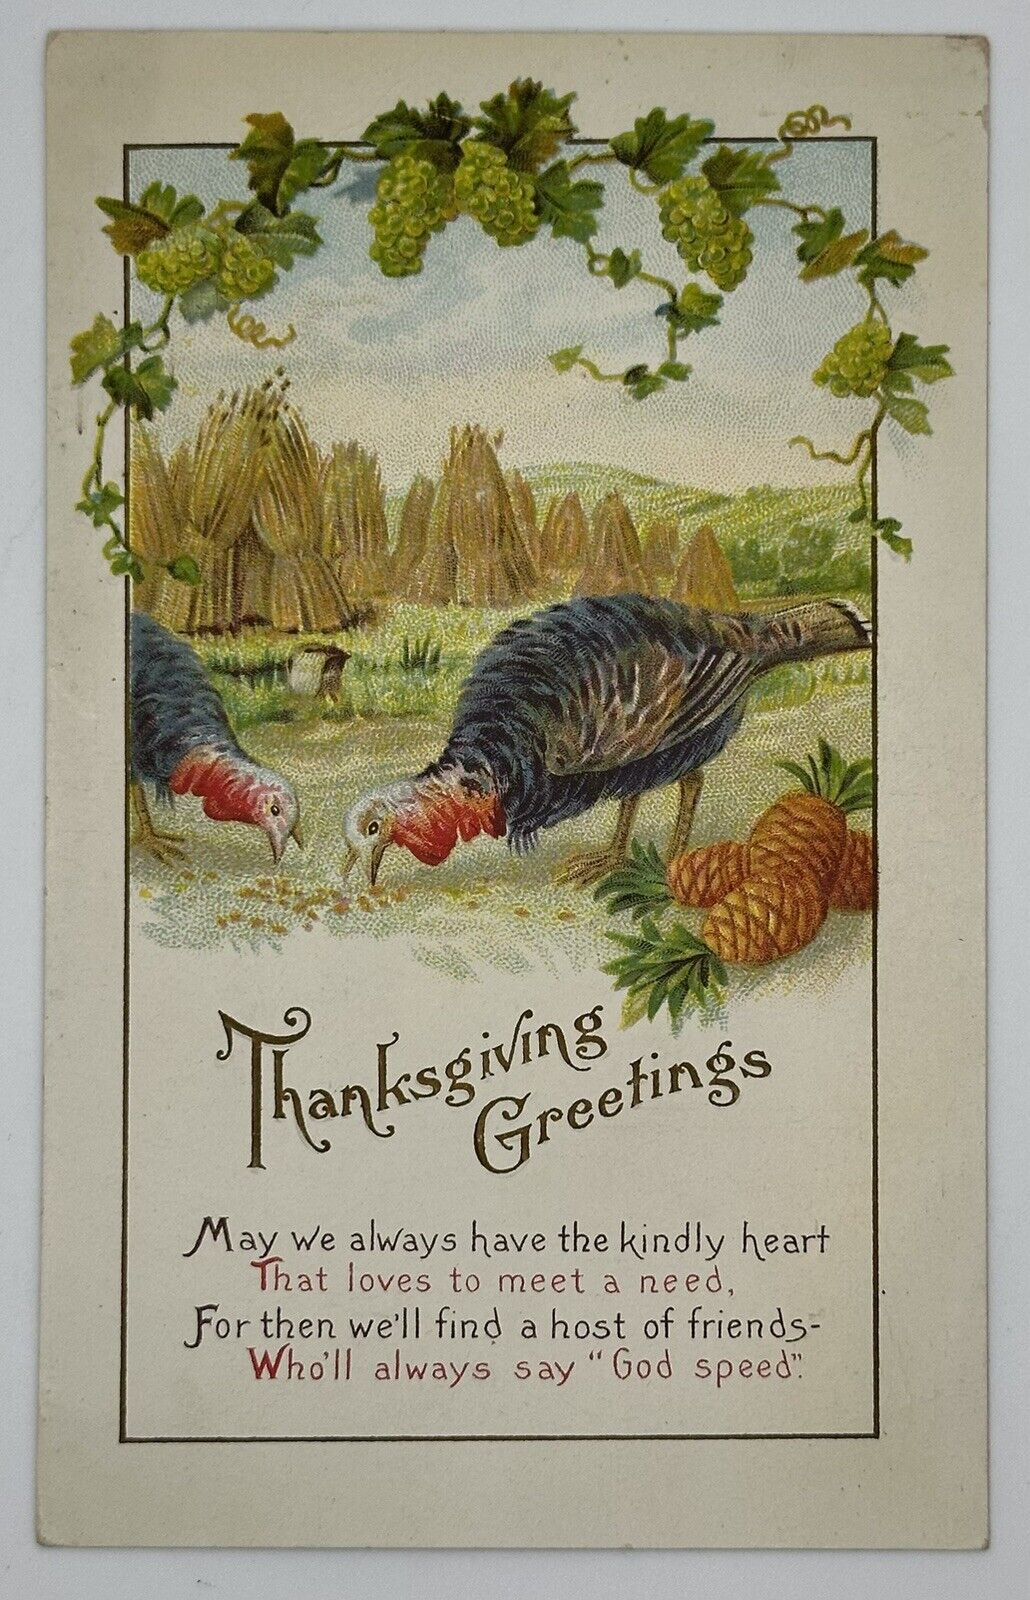 Antique 1910s Thanksgiving Greetings Postcard Godspeed Gobblers 